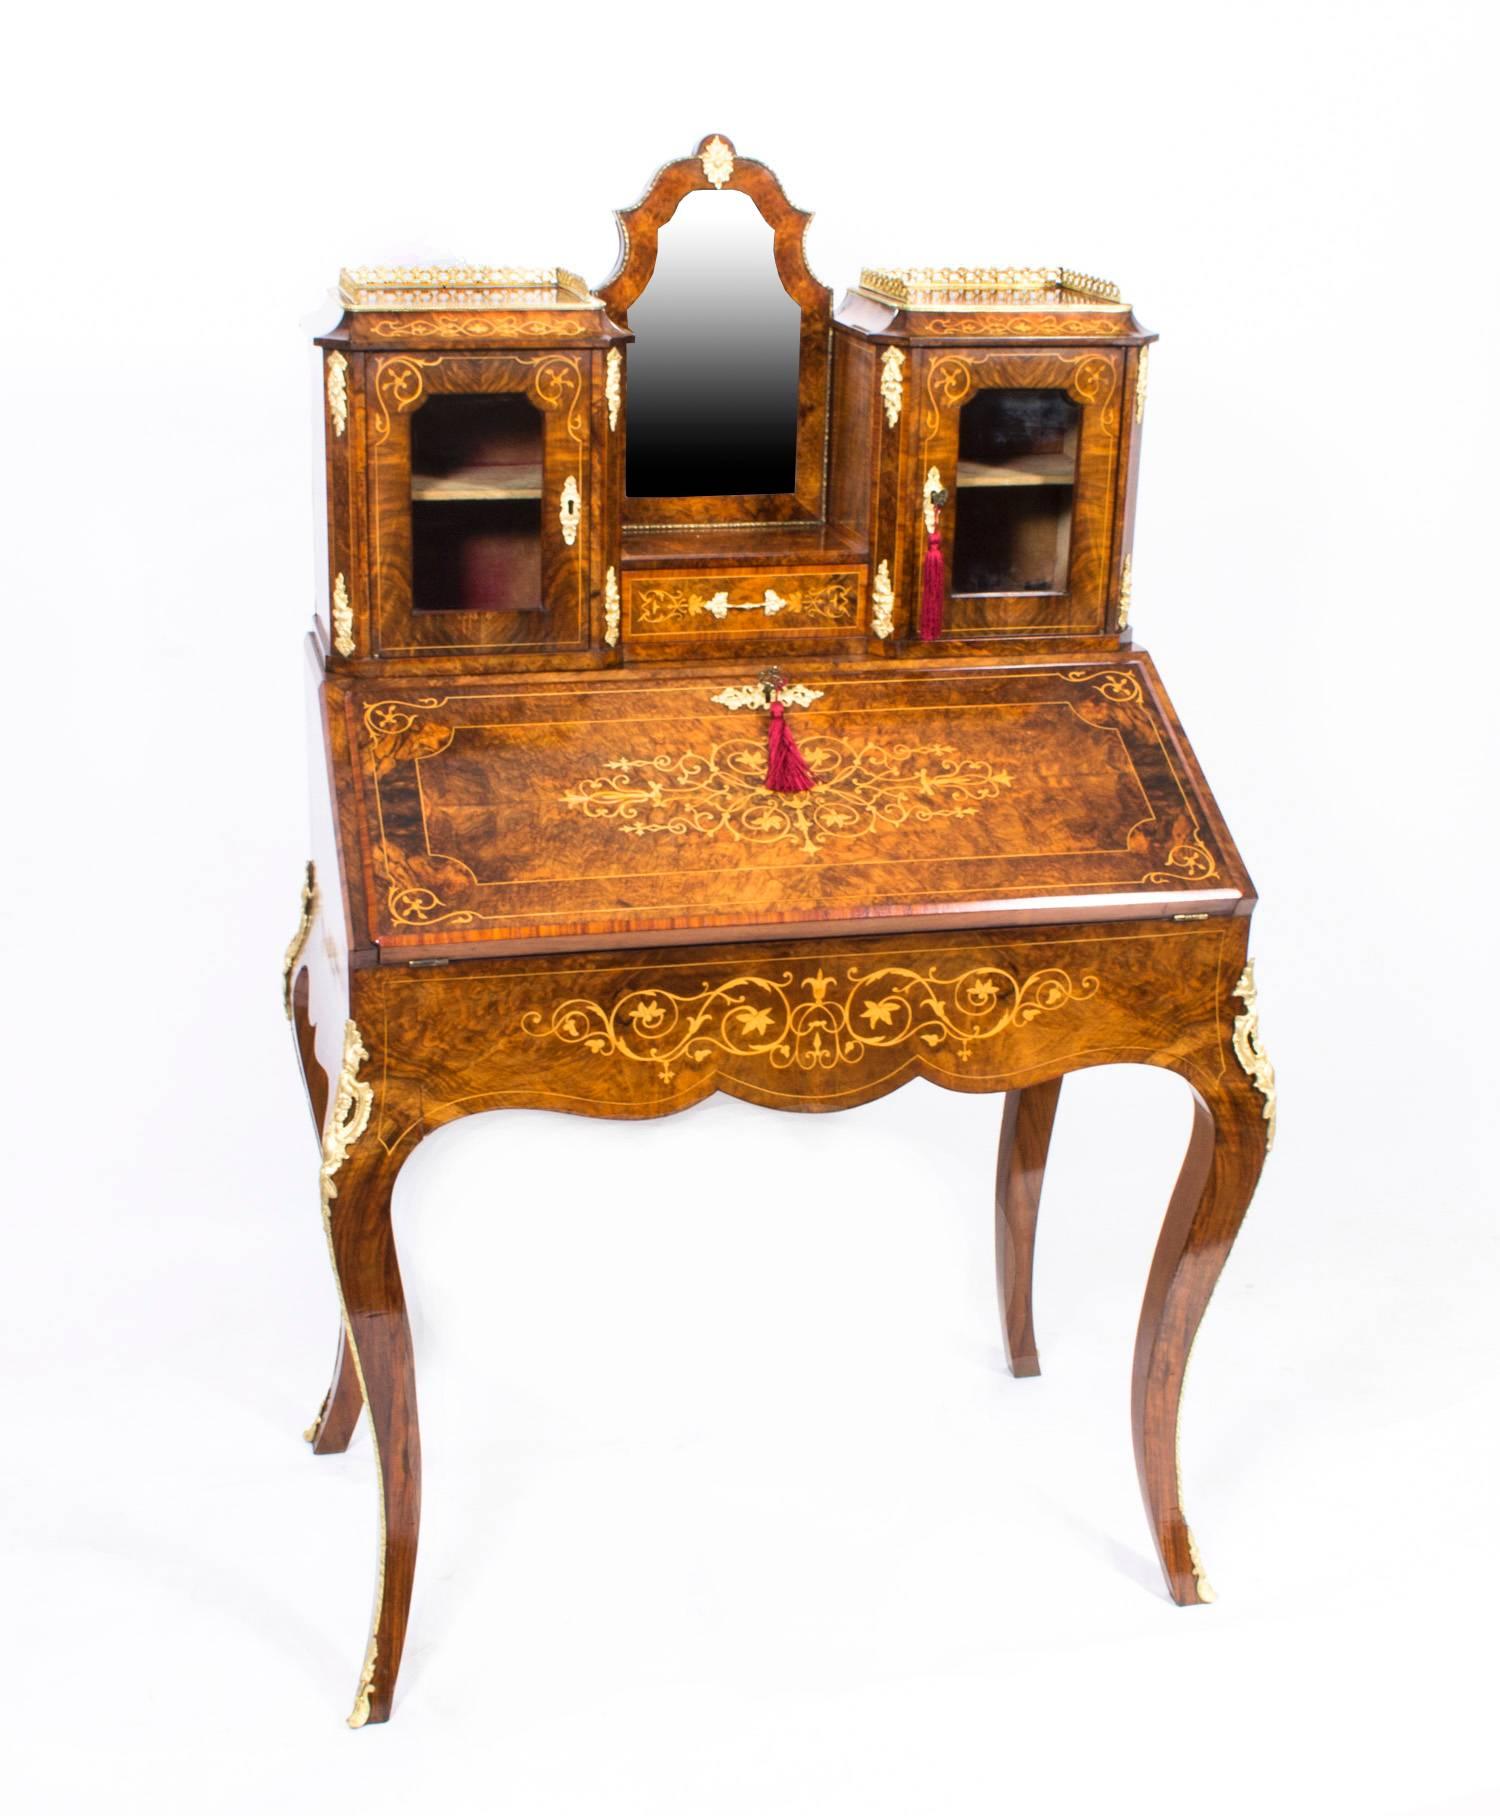 This is a beautiful antique Victorian burr walnut and inlaid Bonheur Du Jour, or Ladies writing desk, circa 1860 in date. 

The gorgeous grain and color of the walnut, the fabulous inlay and the exquisite ormolu mounts ensure that this bureau de